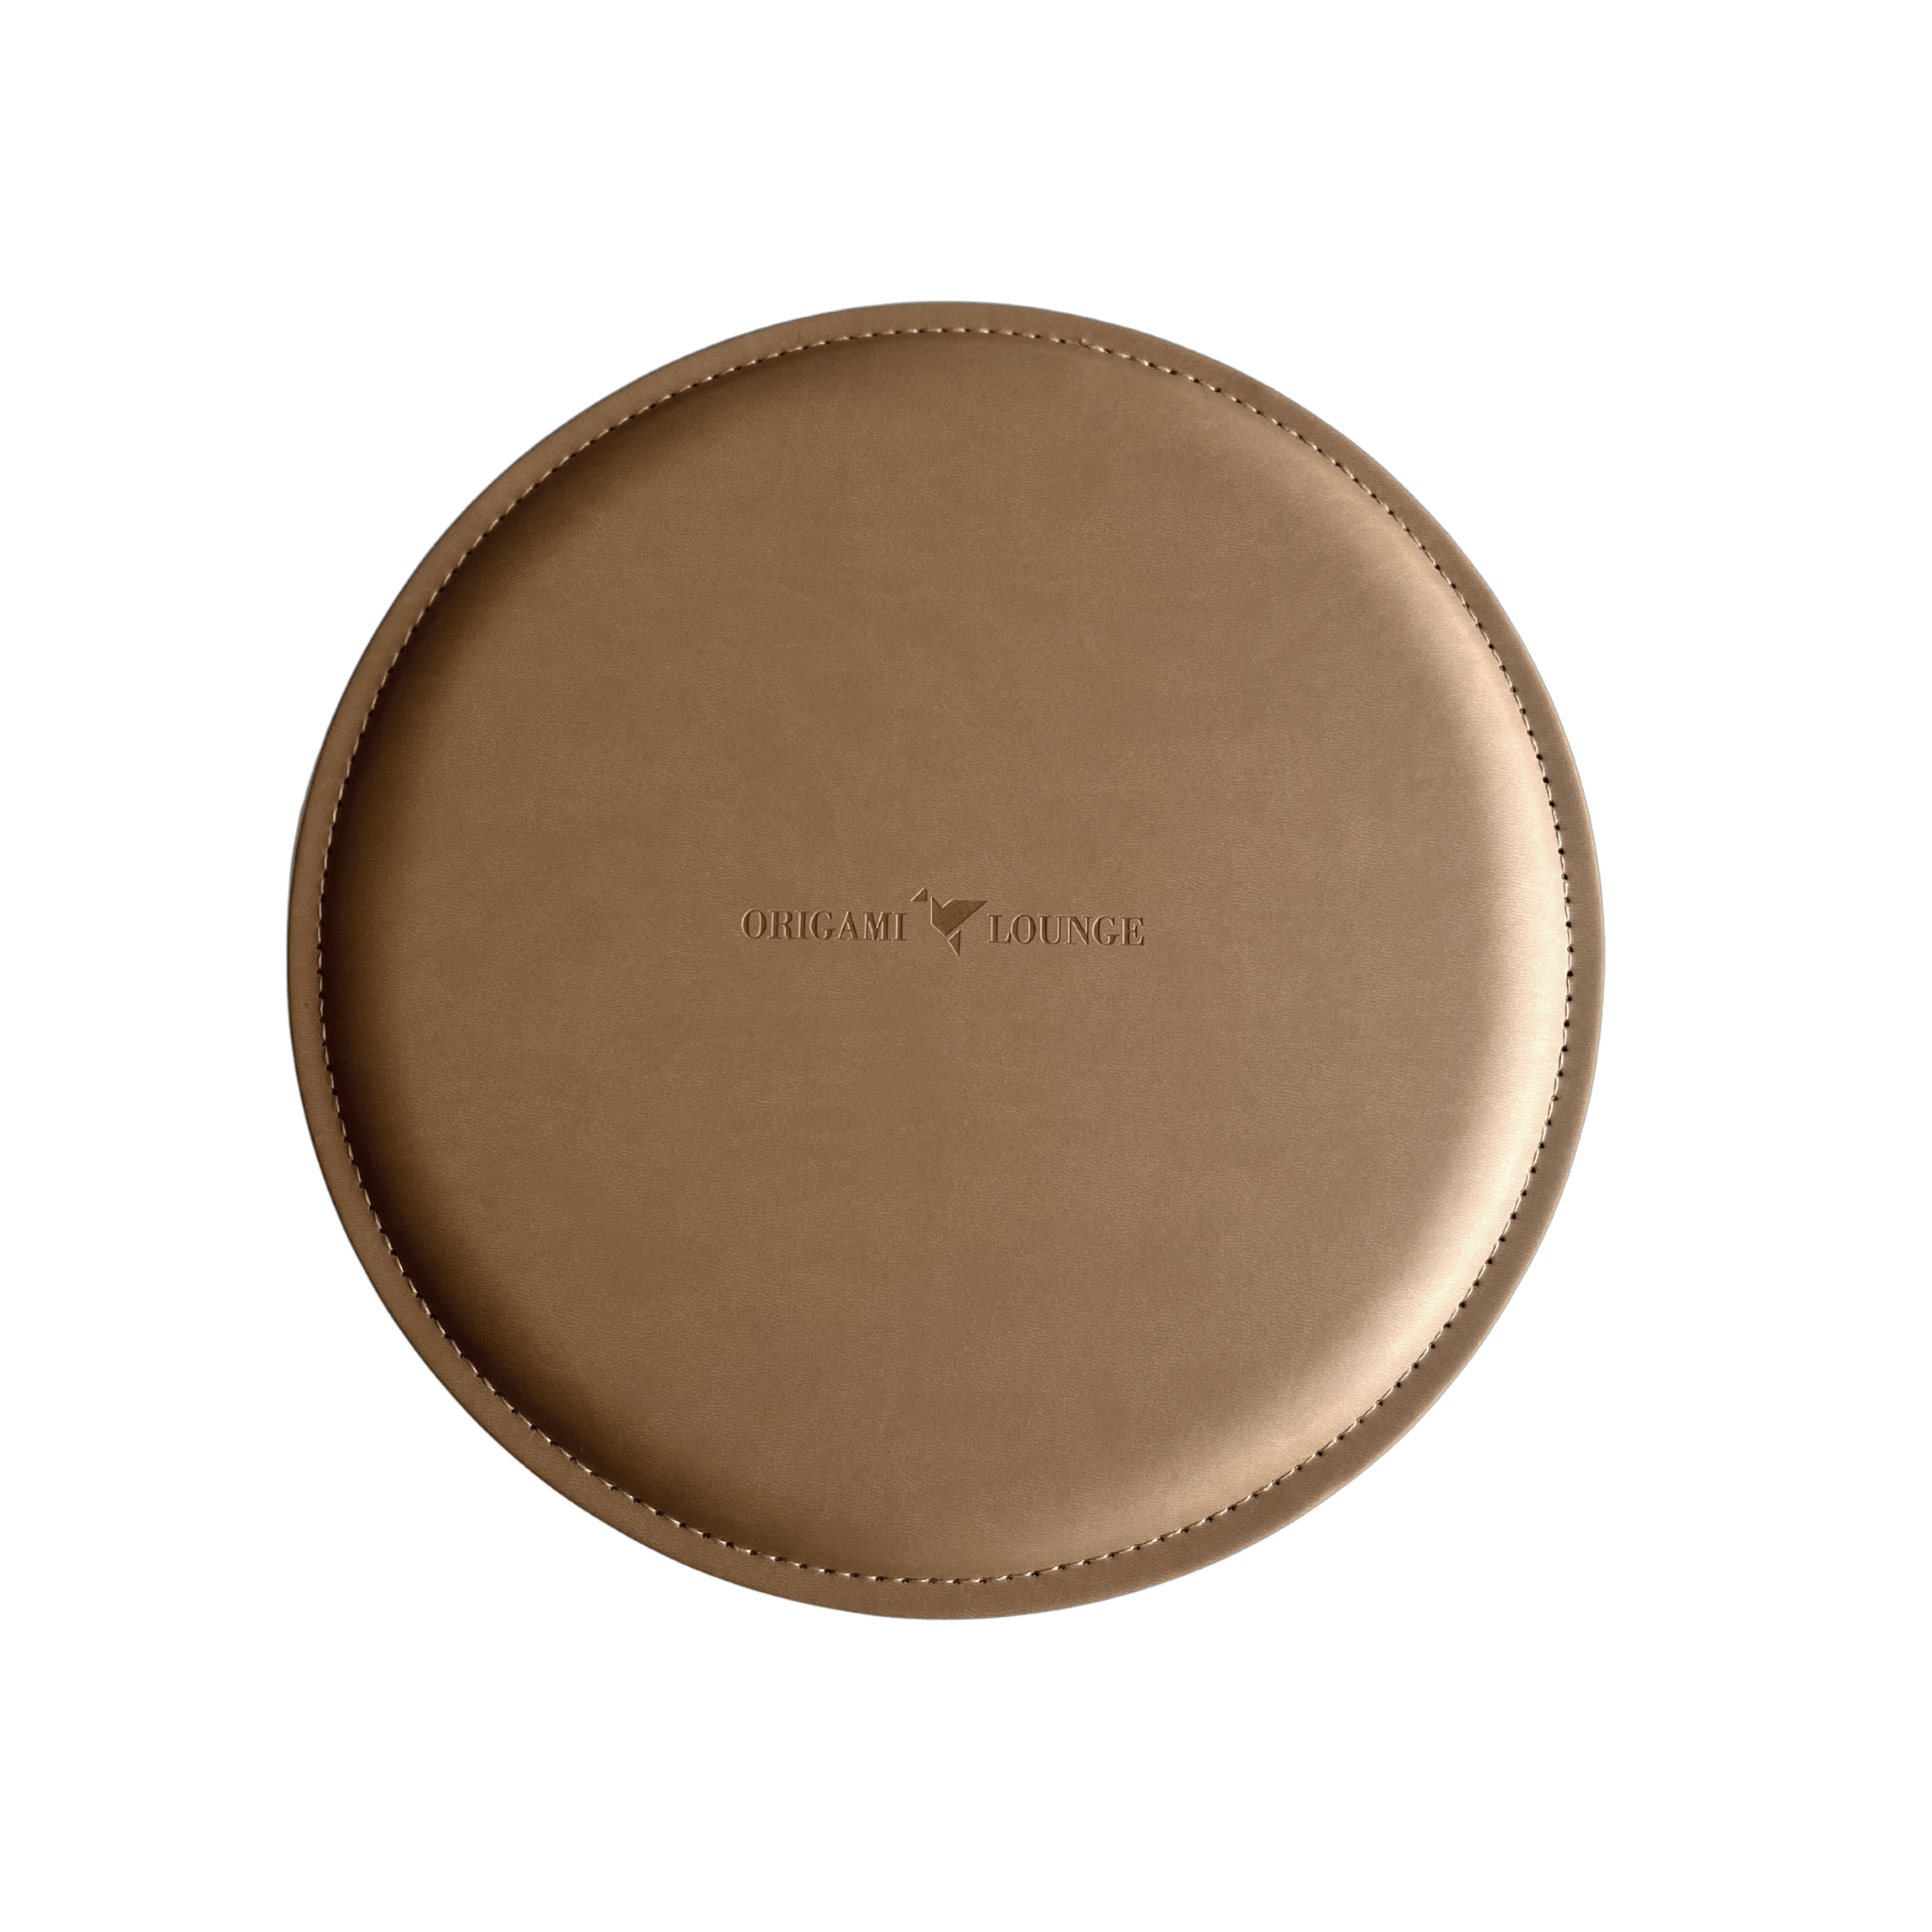 brown leather cushion with origami lounge logo